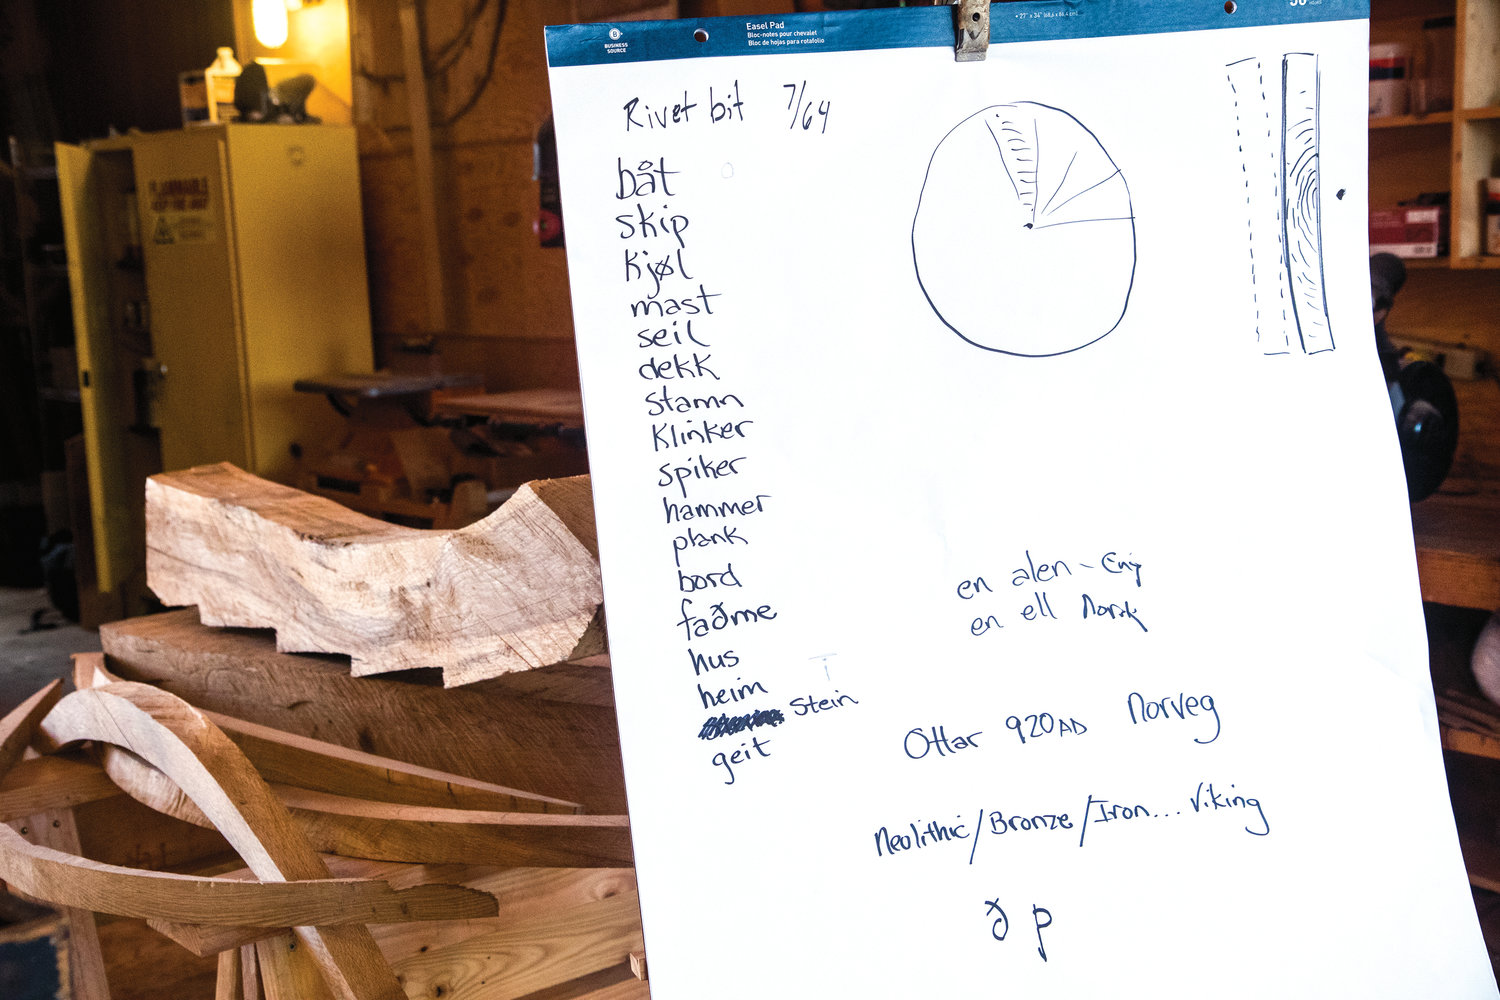 Teaching wordcraft alongside woodcraft, Viking-method boat-wright Jay Smith's course at the Northwest Maritime Center helps students make connections between common English terms and those from Norse seafaring culture.